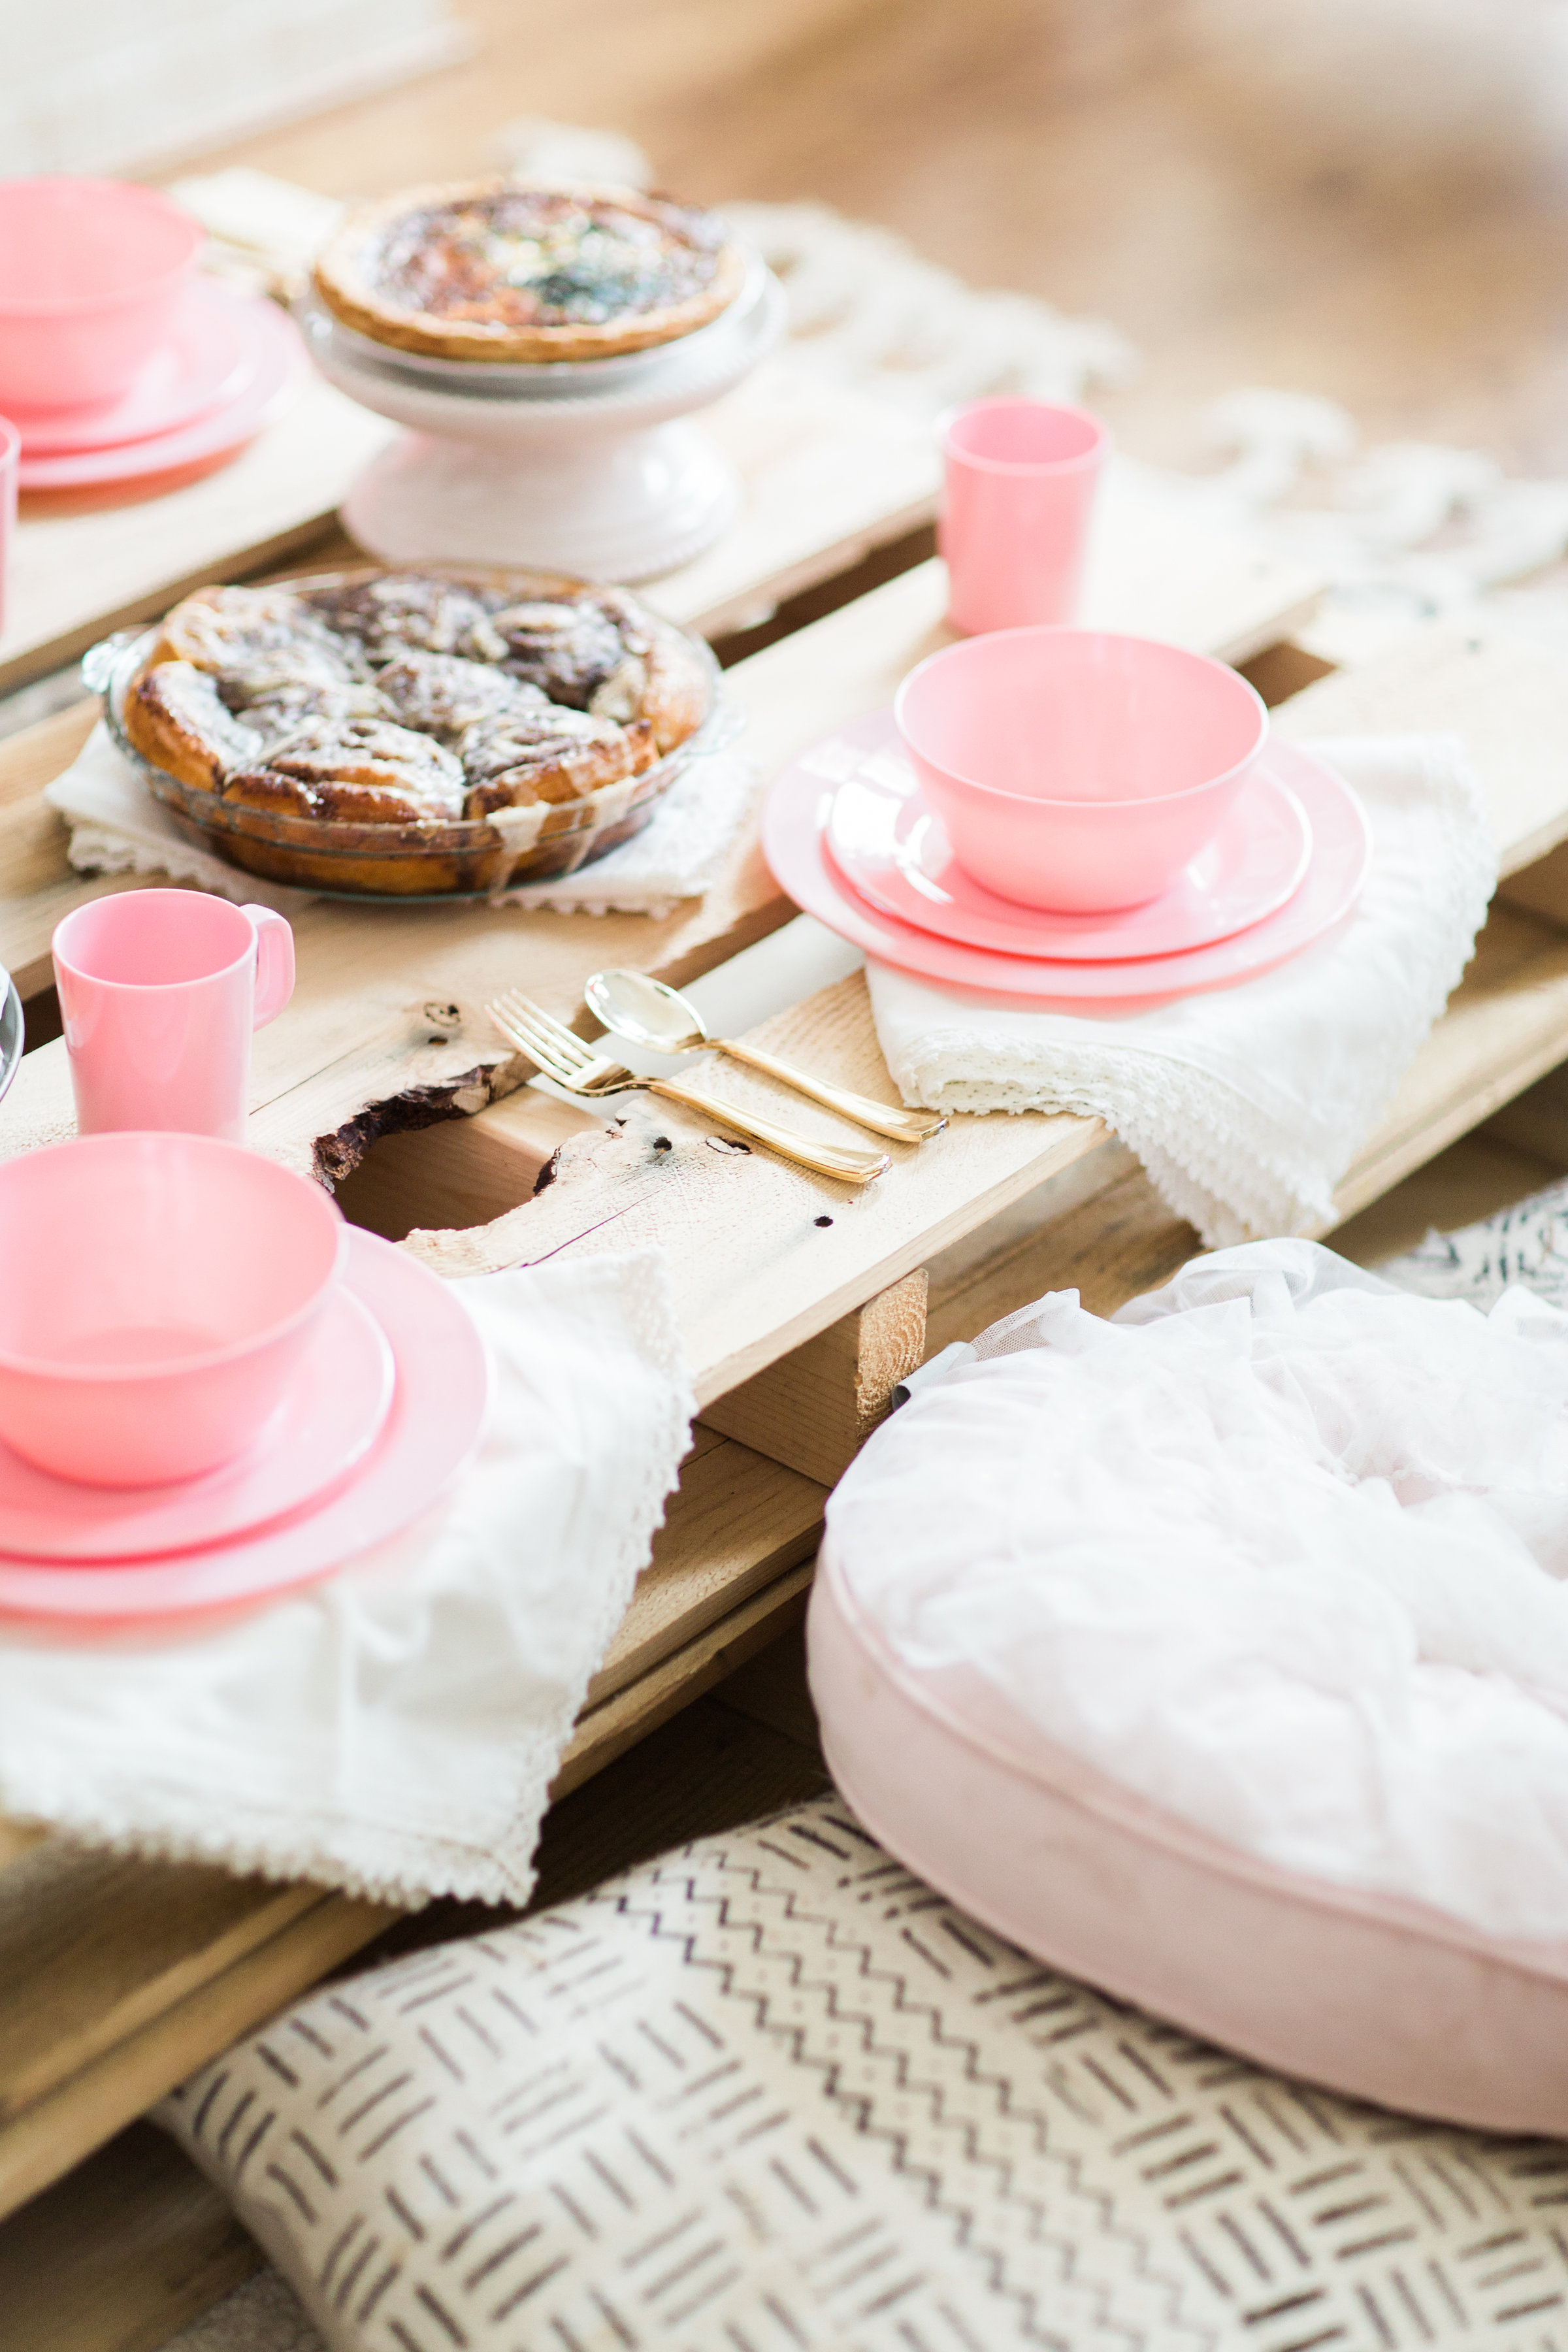 Looking for the sweetest Easter party for your little ones this Spring? This Some Bunny Loves You kids picnic Easter party has it all! | glitterinc.com | @glitterinc - Some Bunny Loves You Kids Picnic Easter Party by popular North Carolina lifestyle blogger Glitter, Inc.